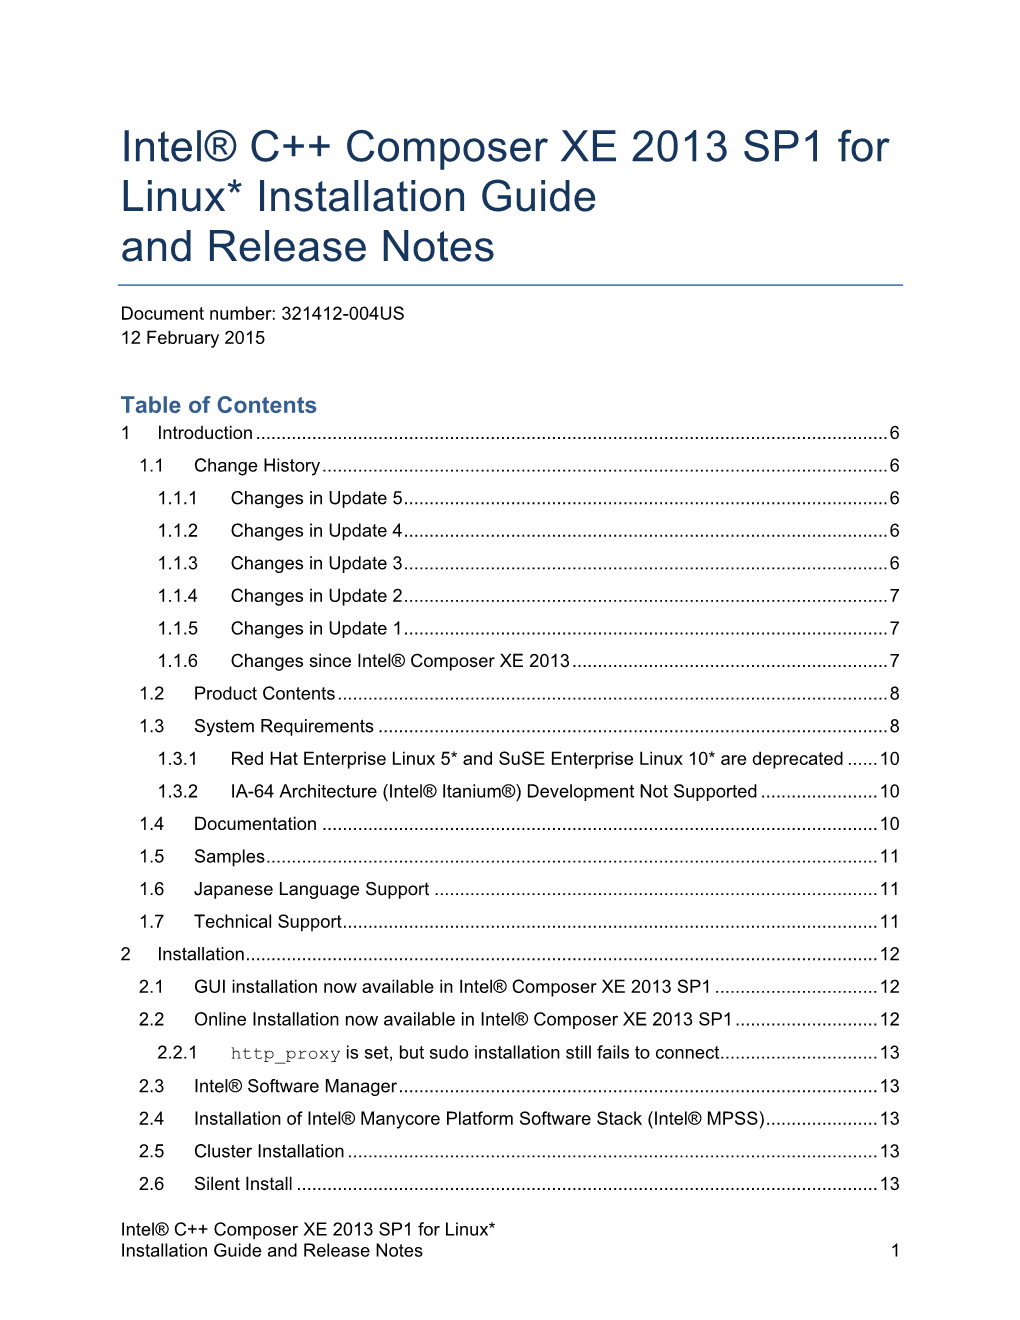 Intel® C++ Composer XE 2013 SP1 for Linux* Installation Guide and Release Notes